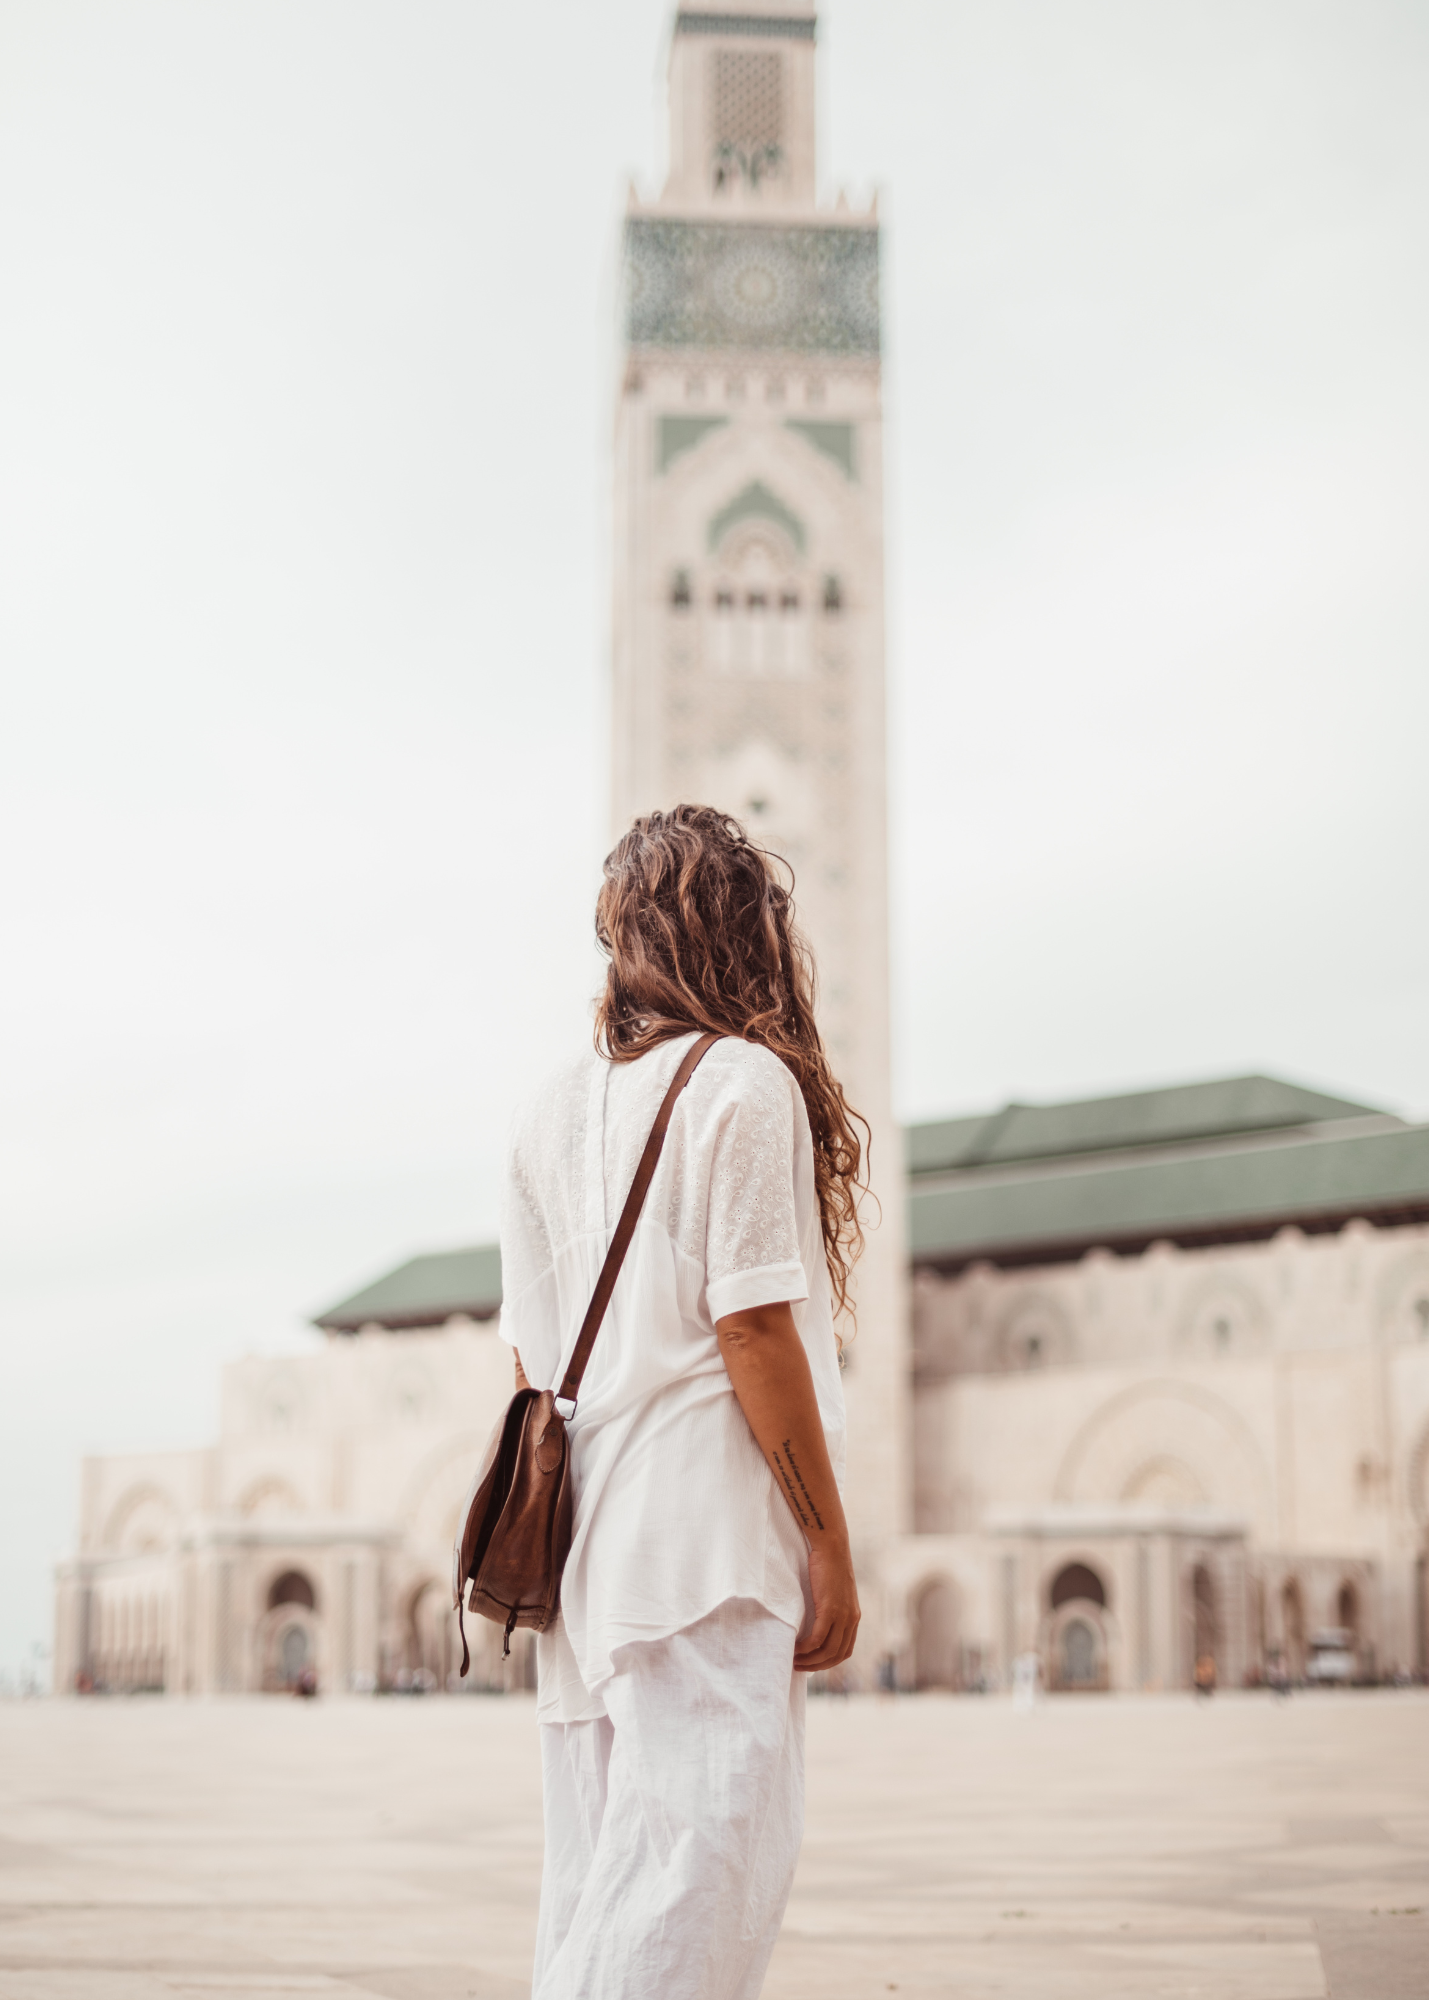 A woman is walking in front of the Hassan II mosque in Casablanca